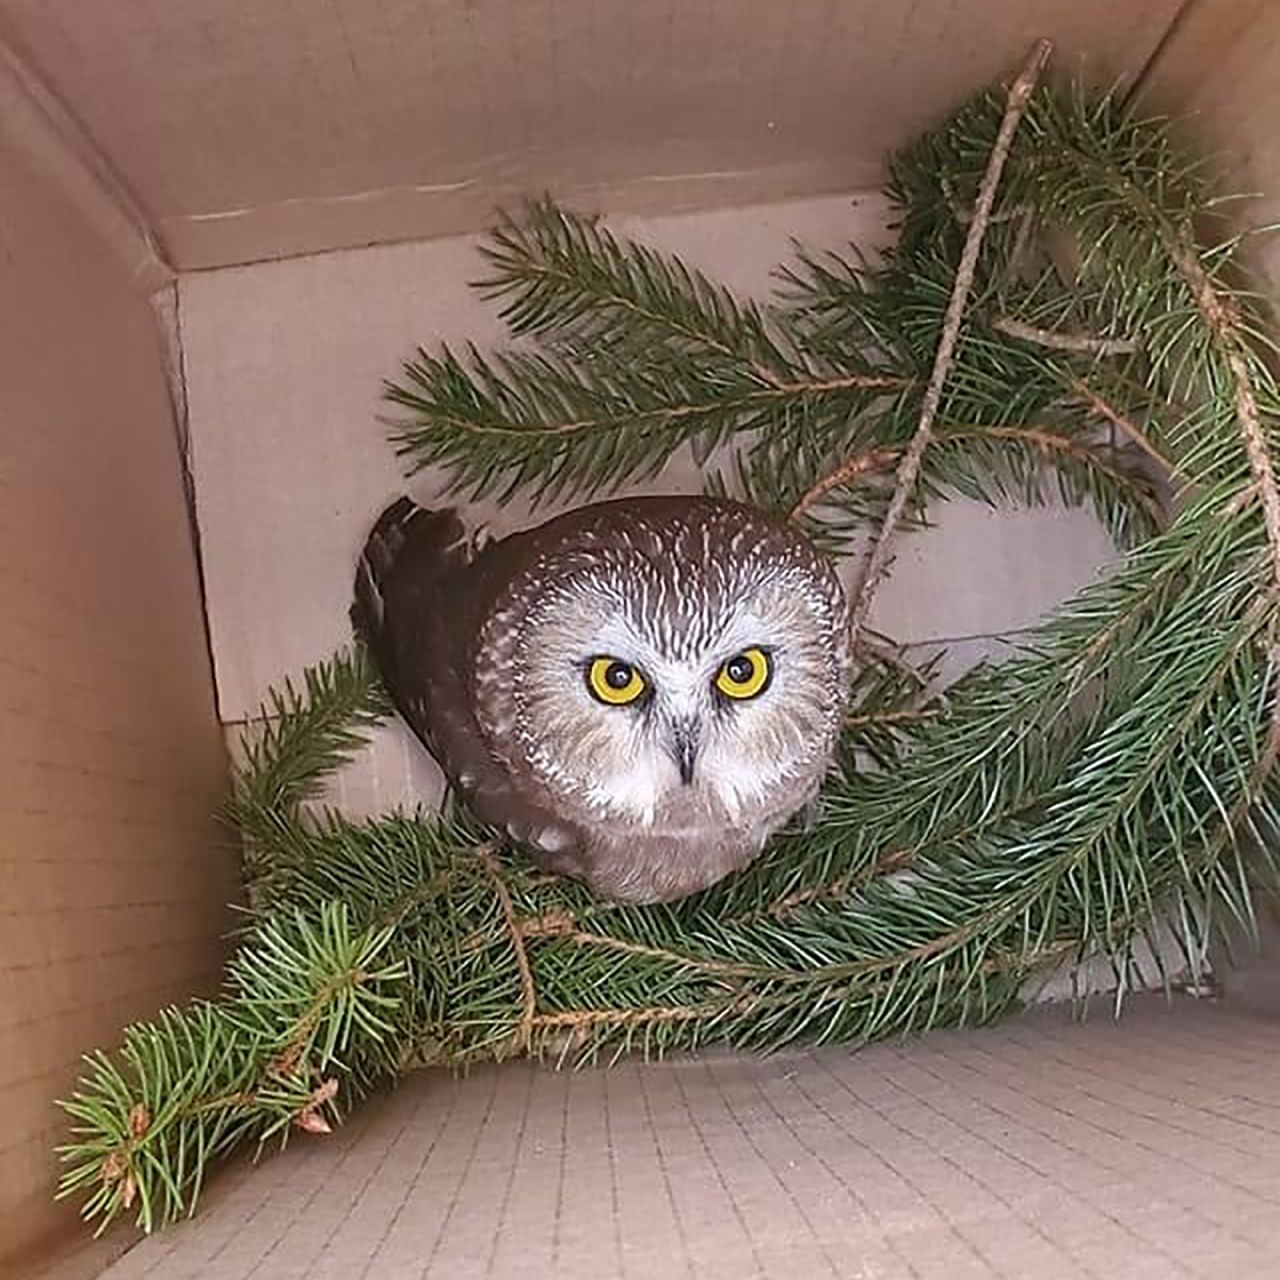 A petite Saw-whet Owl peers up from a box after being <a href="https://www.cnn.com/2020/11/19/us/rockefeller-christmas-tree-owl-trnd/index.html" target="_blank">removed from the Rockefeller Christmas tree</a> in New York on Wednesday, November 18. The owl nicknamed "Rockefeller," had traveled in the tree after it was cut down in Oneonta, New York. 